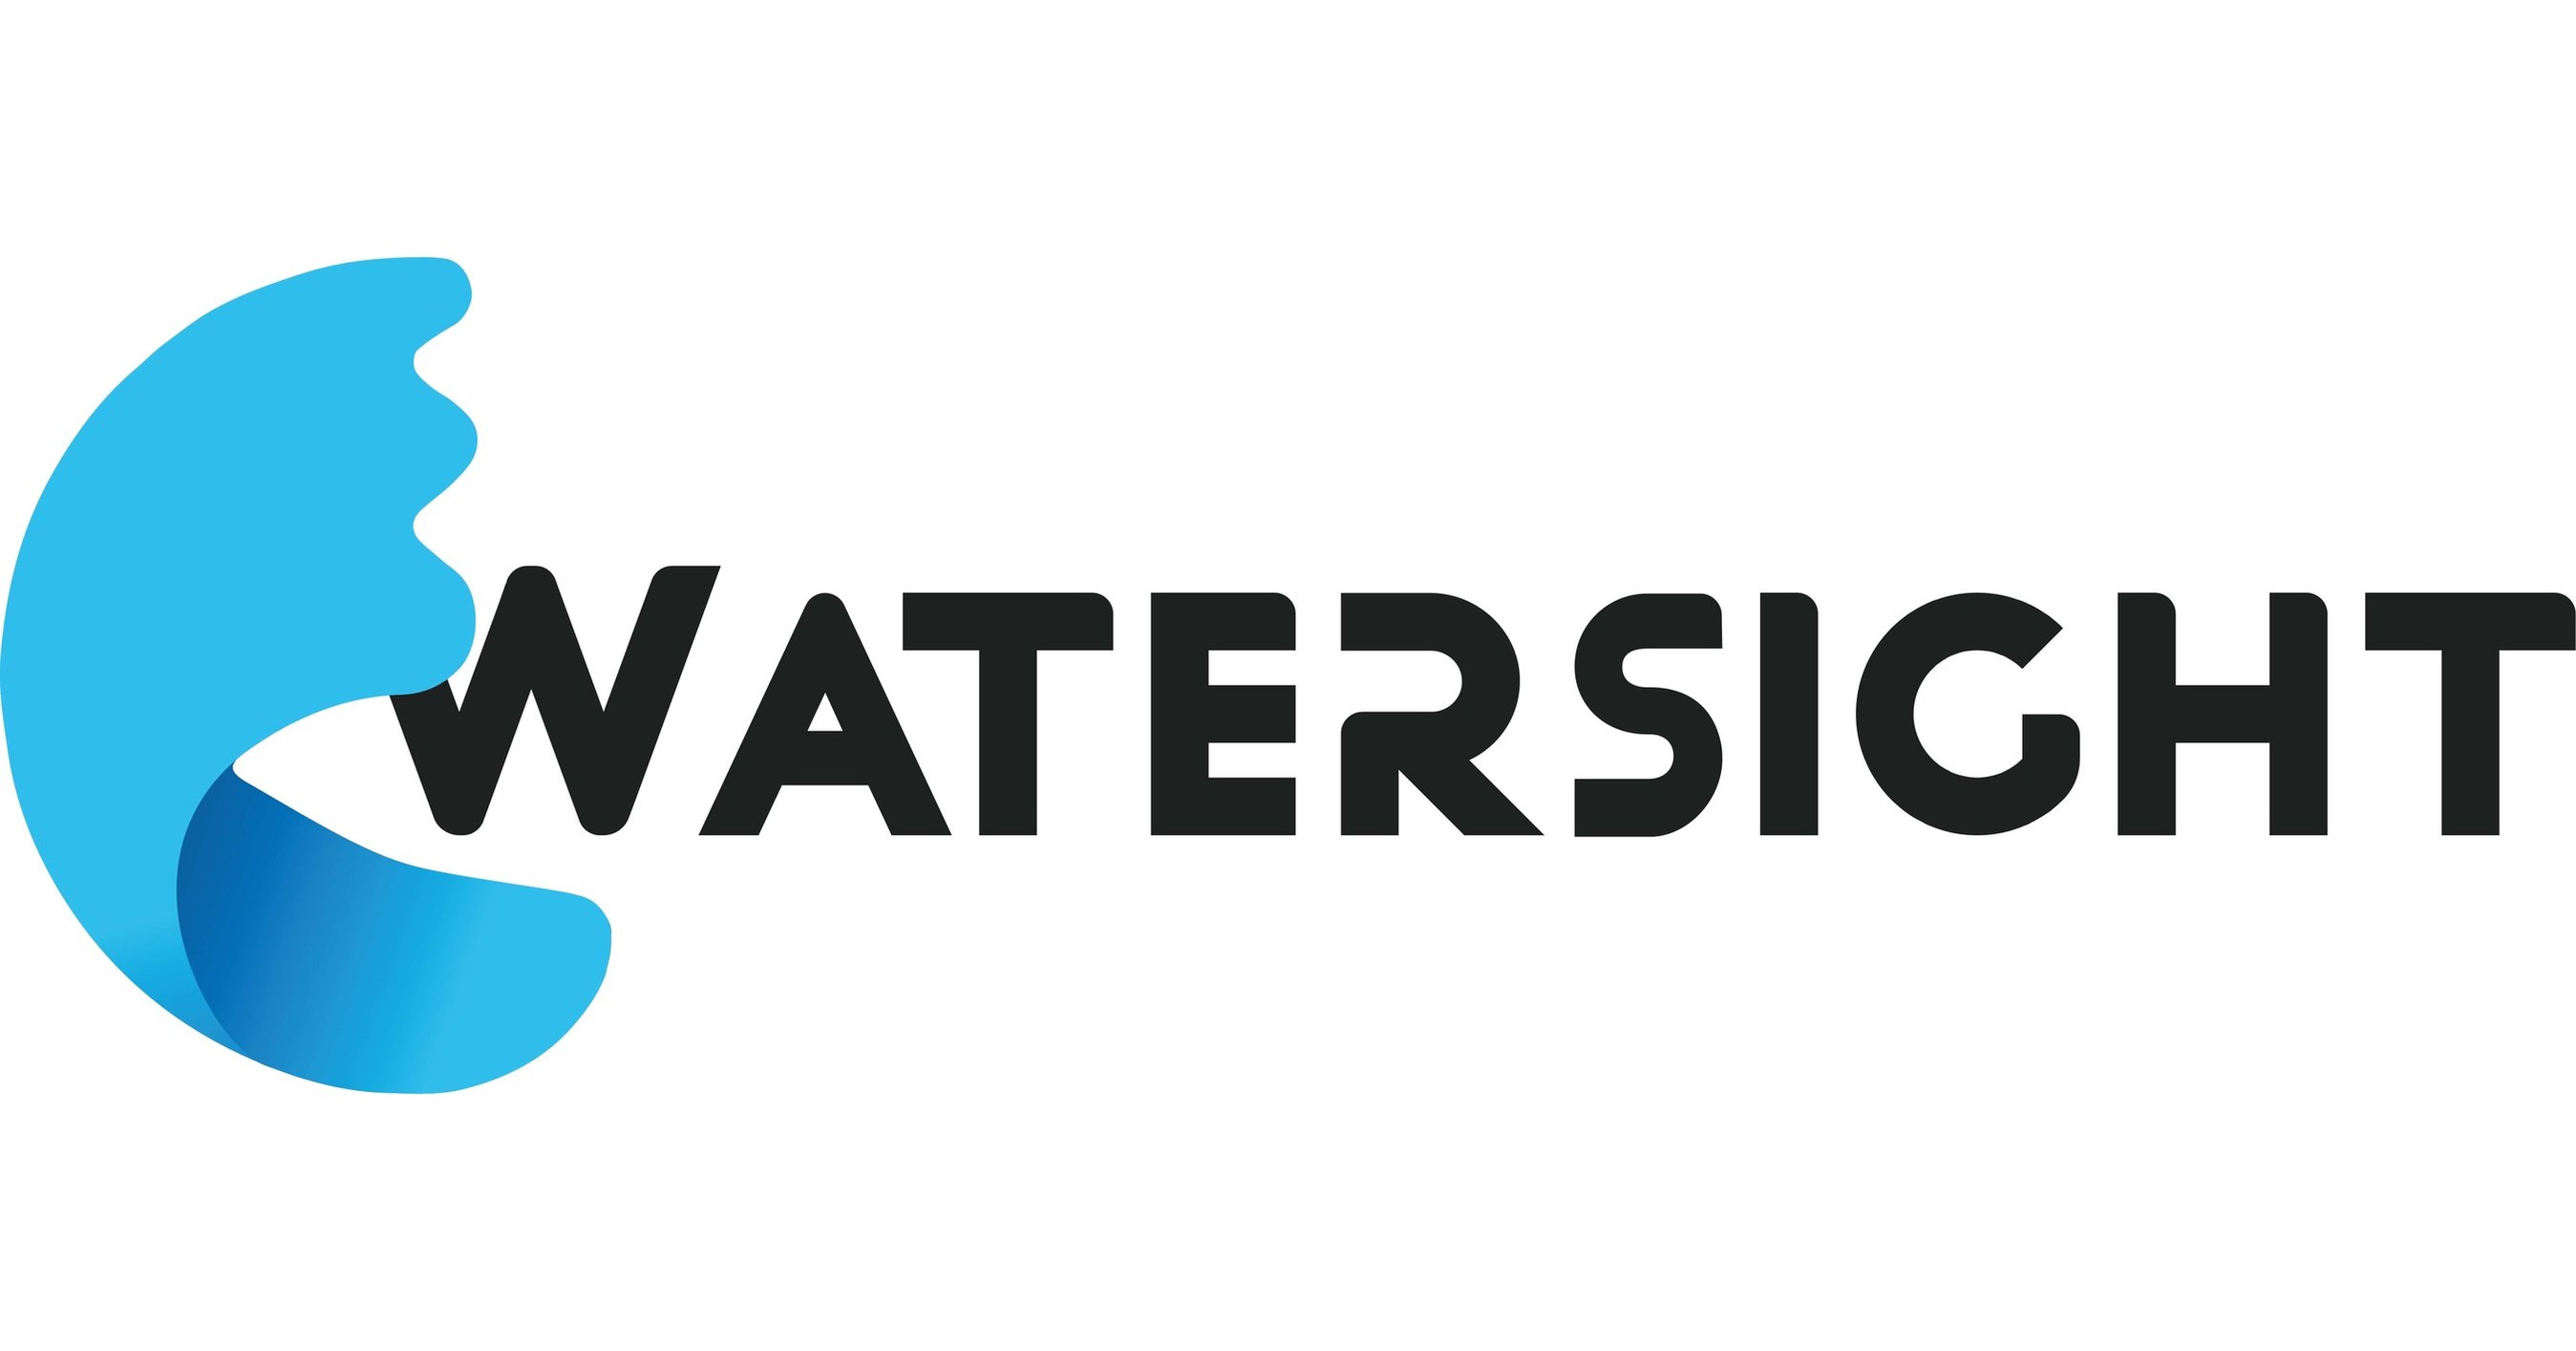 Watersight Releases the AquaRing